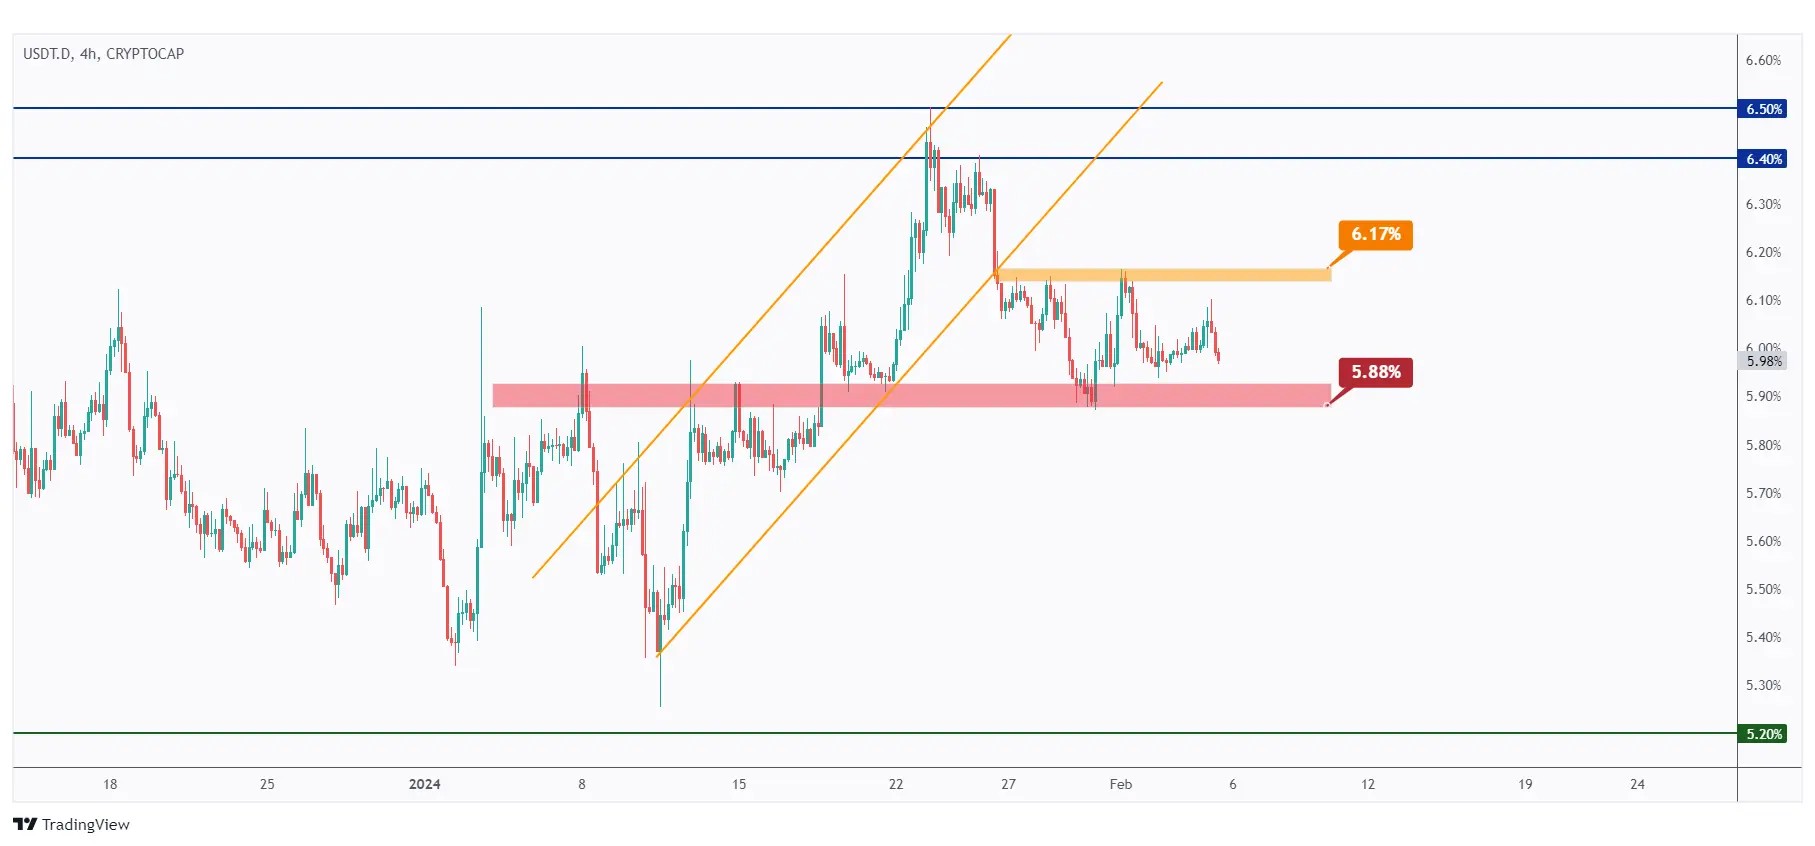 USDT dominance 4h chart showing that it is hovering inside a narrow range.